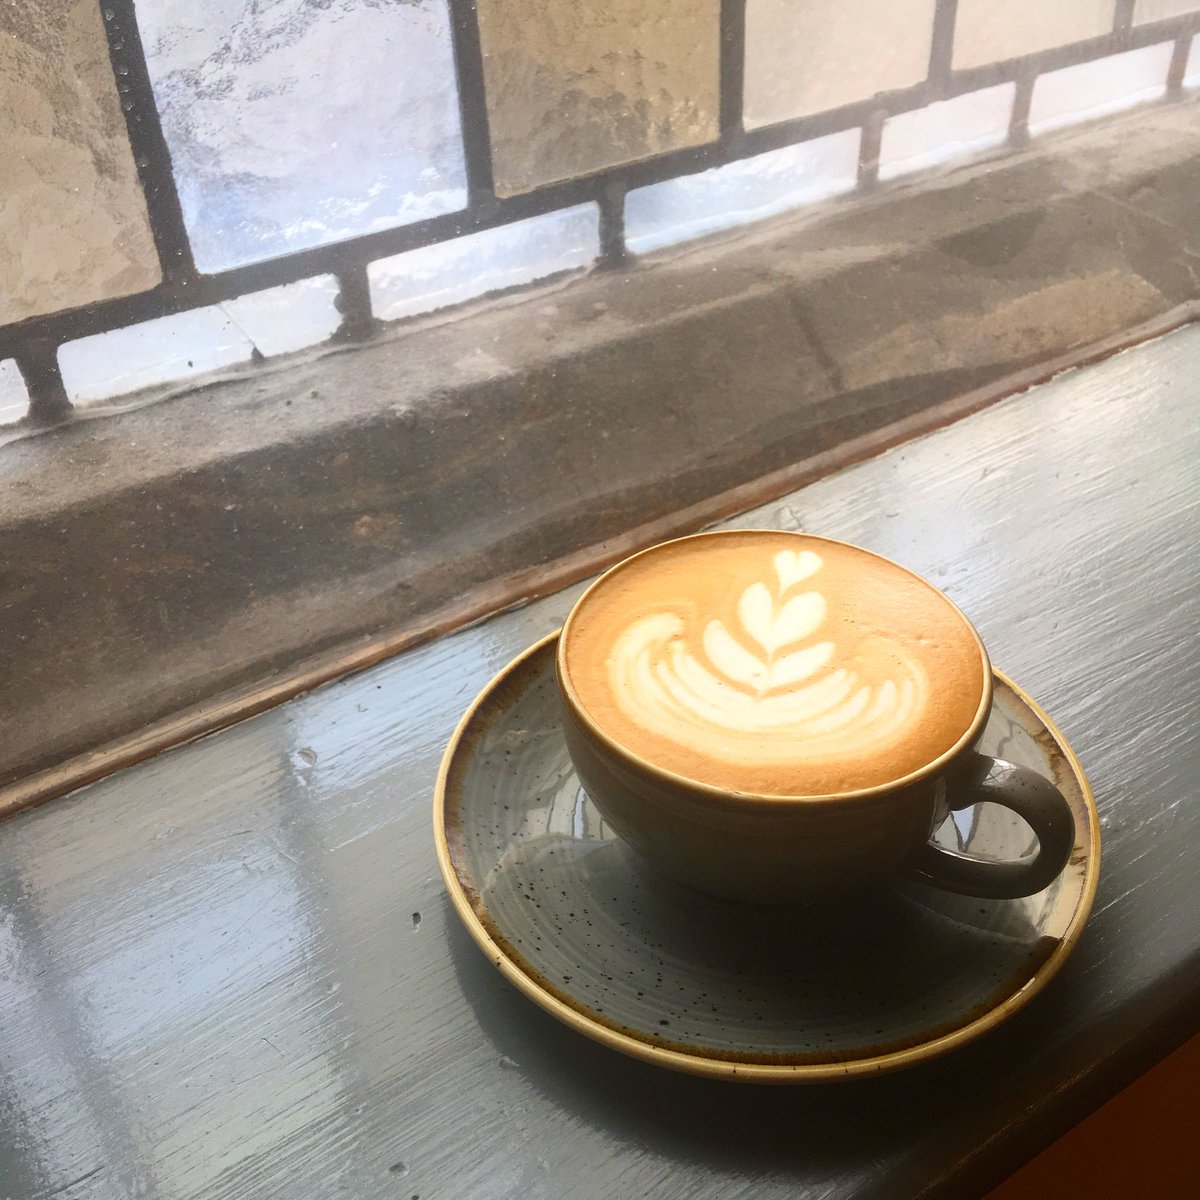 We’ve got your Wednesday coffee covered 👍 ☕️ #coffee #chester #chestercoffee #coffeeshop #cute #latteart #freshcoffee #beantocup #discoverchester #lovechester #cheshire #visitchester